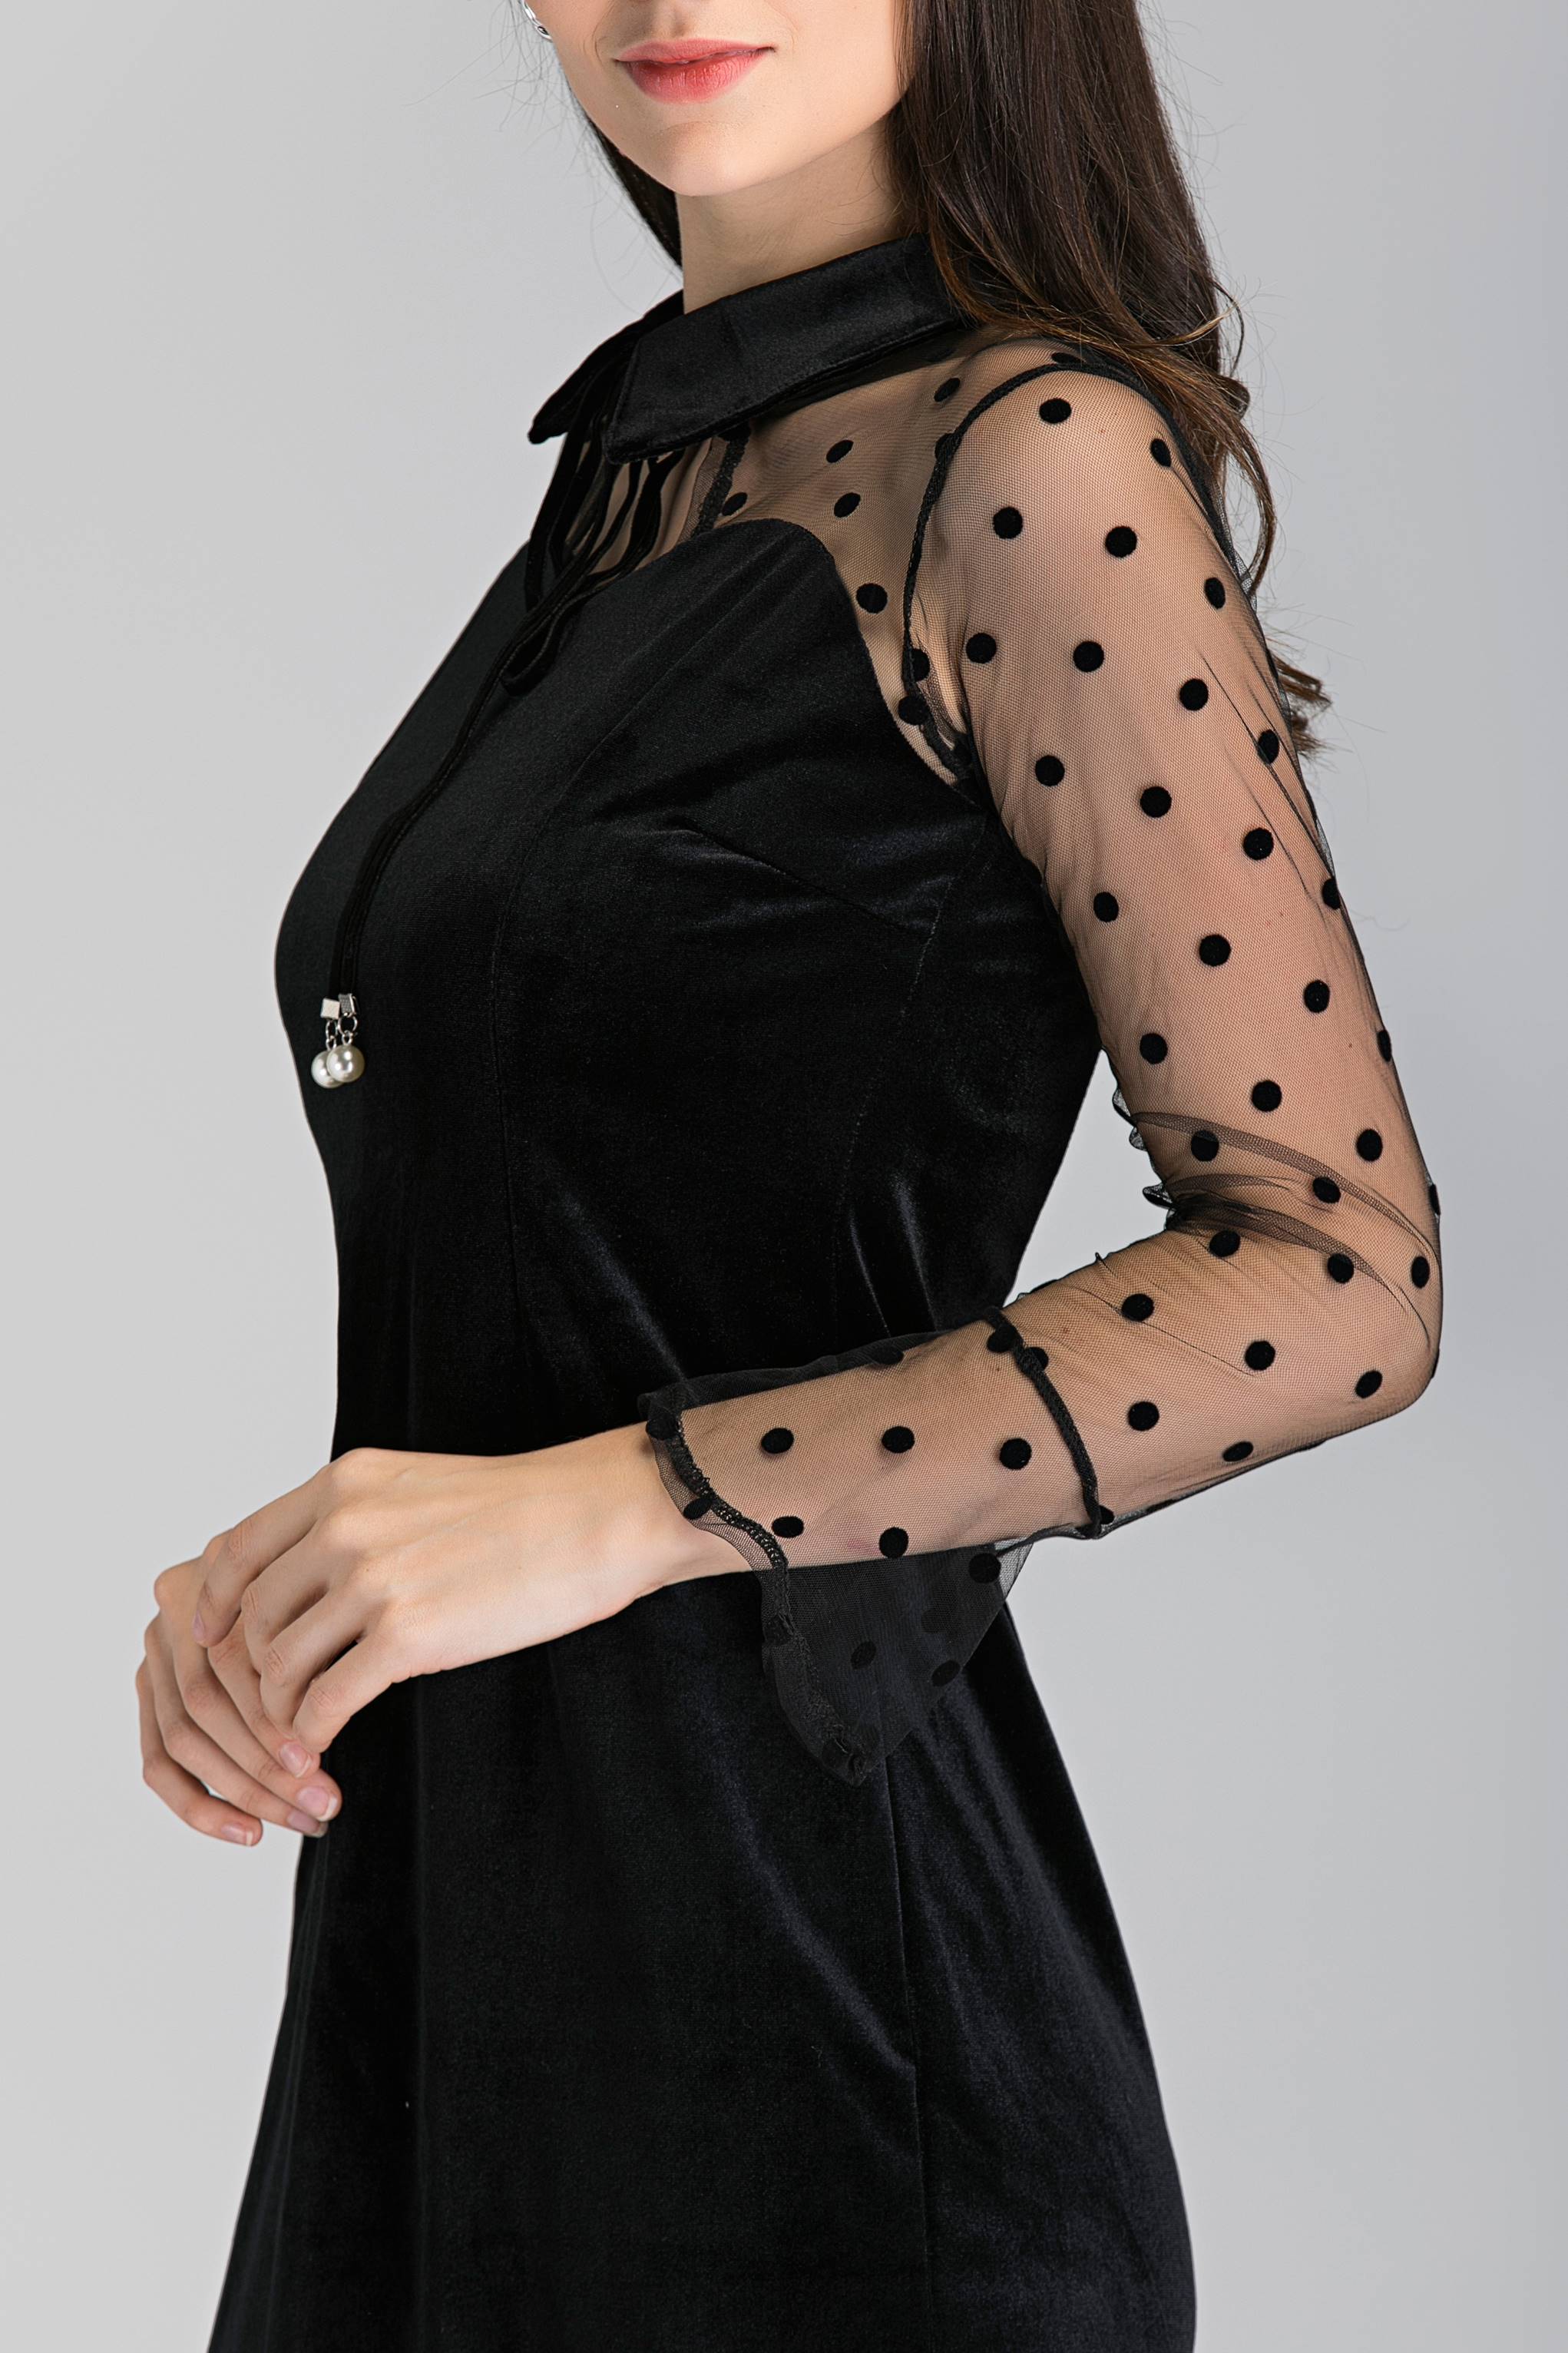 black dress with sheer top and sleeves